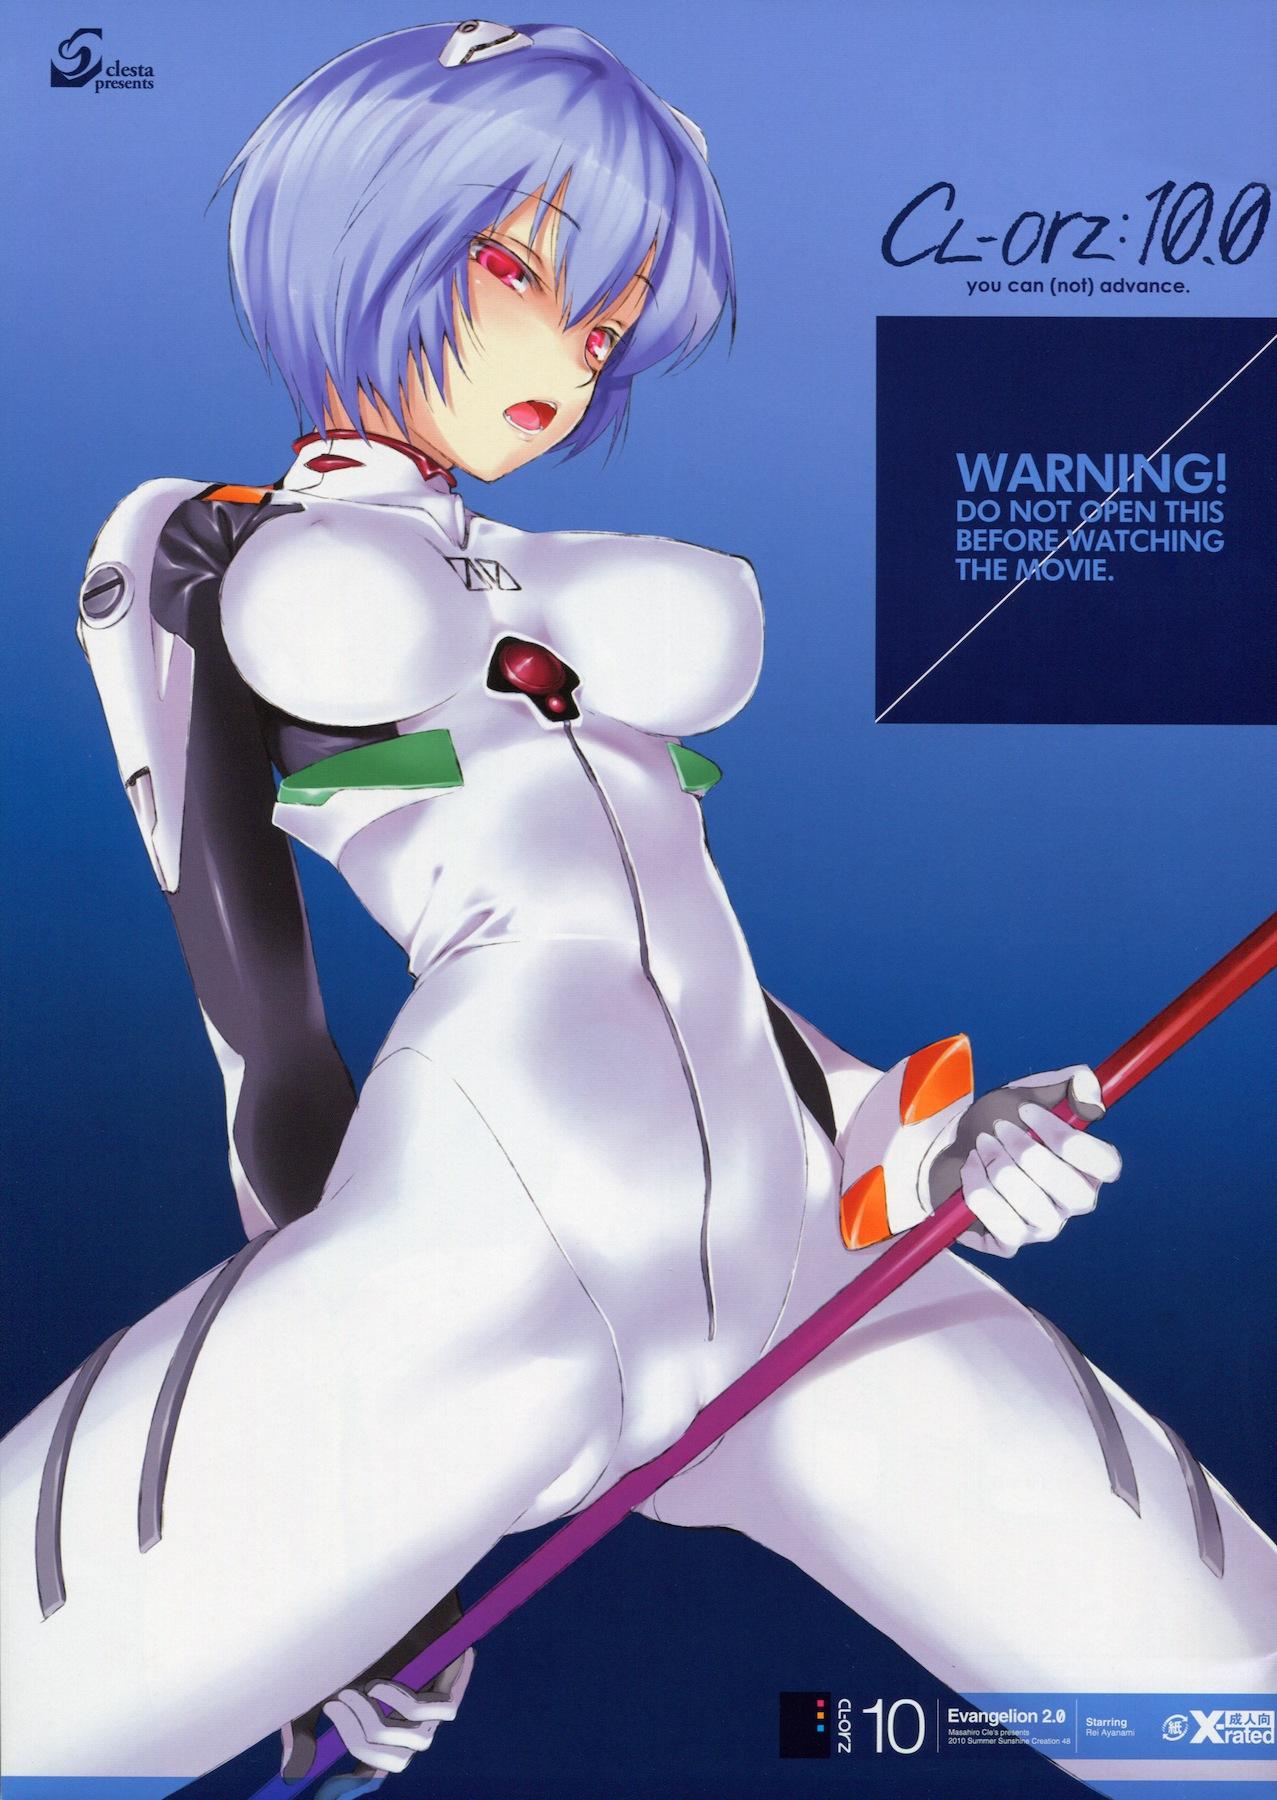 (SC48) [Clesta (Cle Masahiro)] CL-orz:10.0 - you can (not) advance (Rebuild of Evangelion) [Decensored] 0